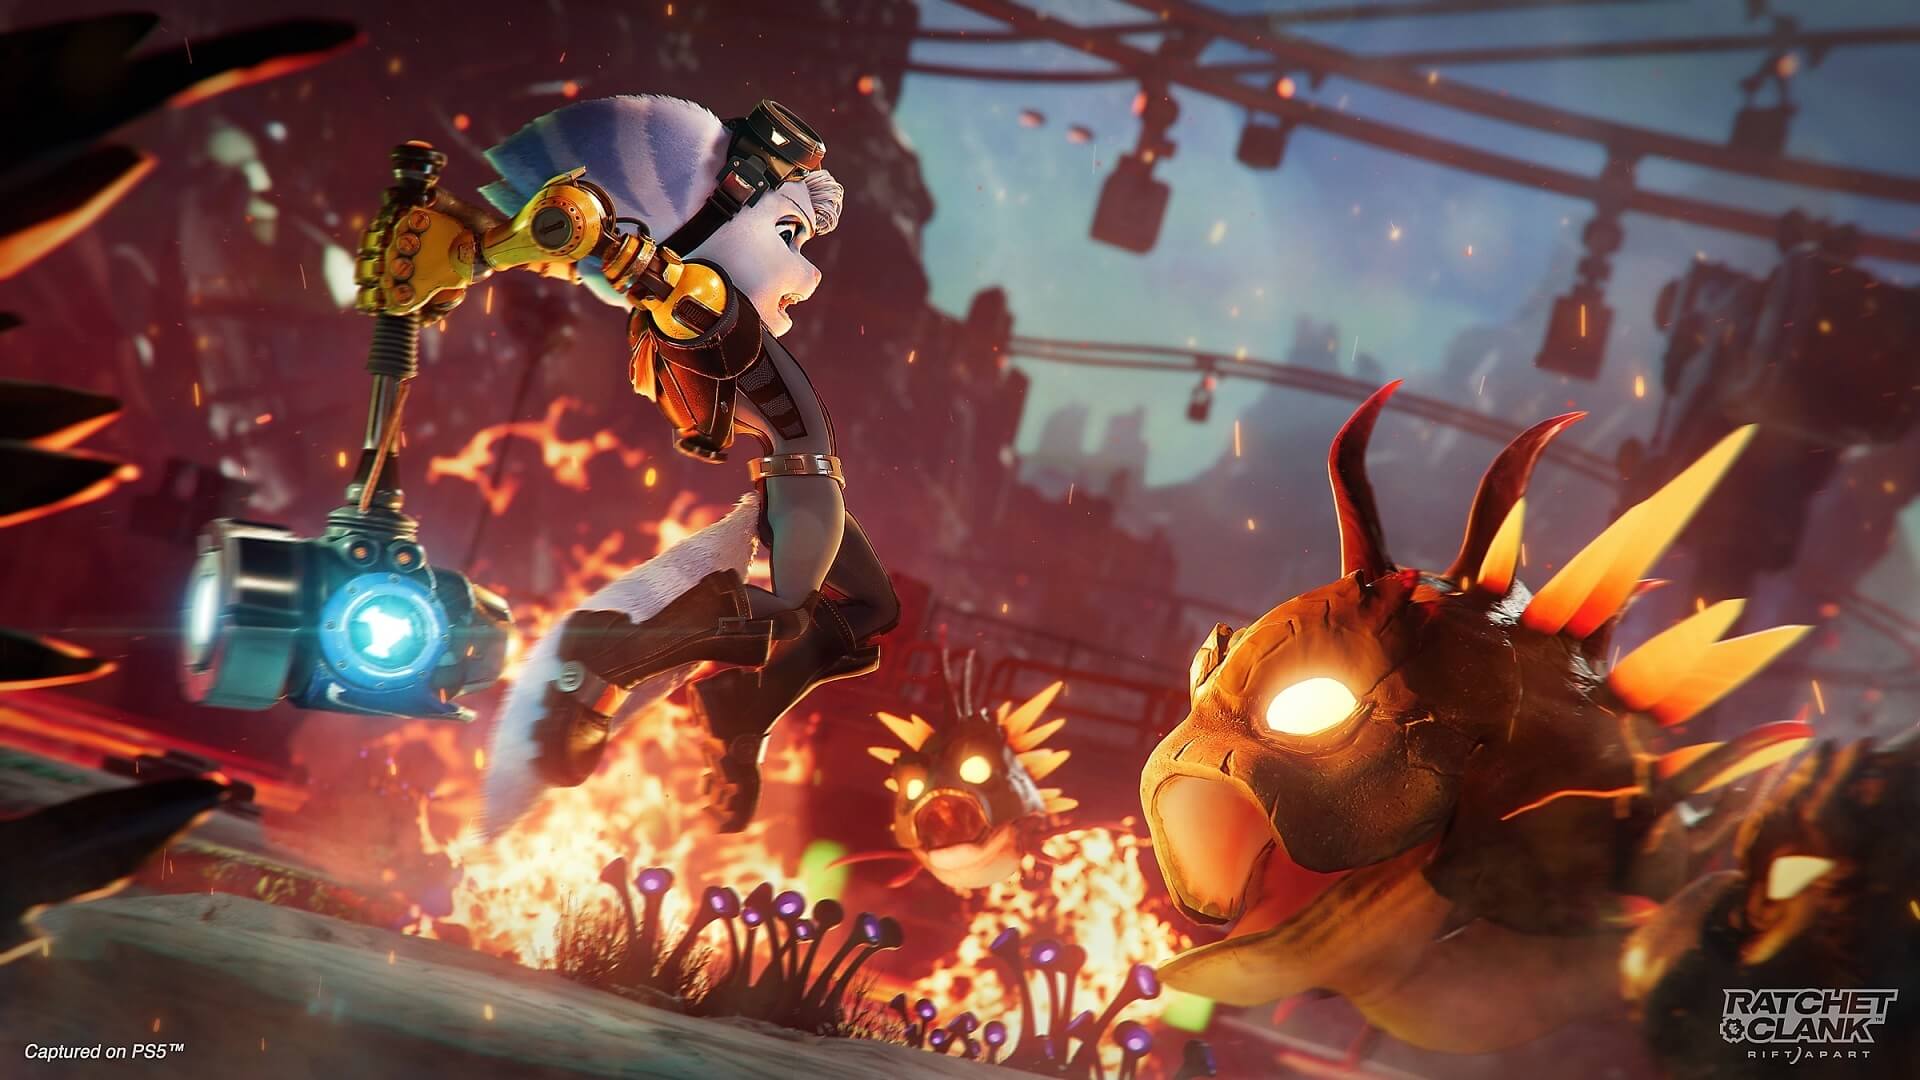 Rivet attacking an enemy in Ratchet and Clank: Rift Apart